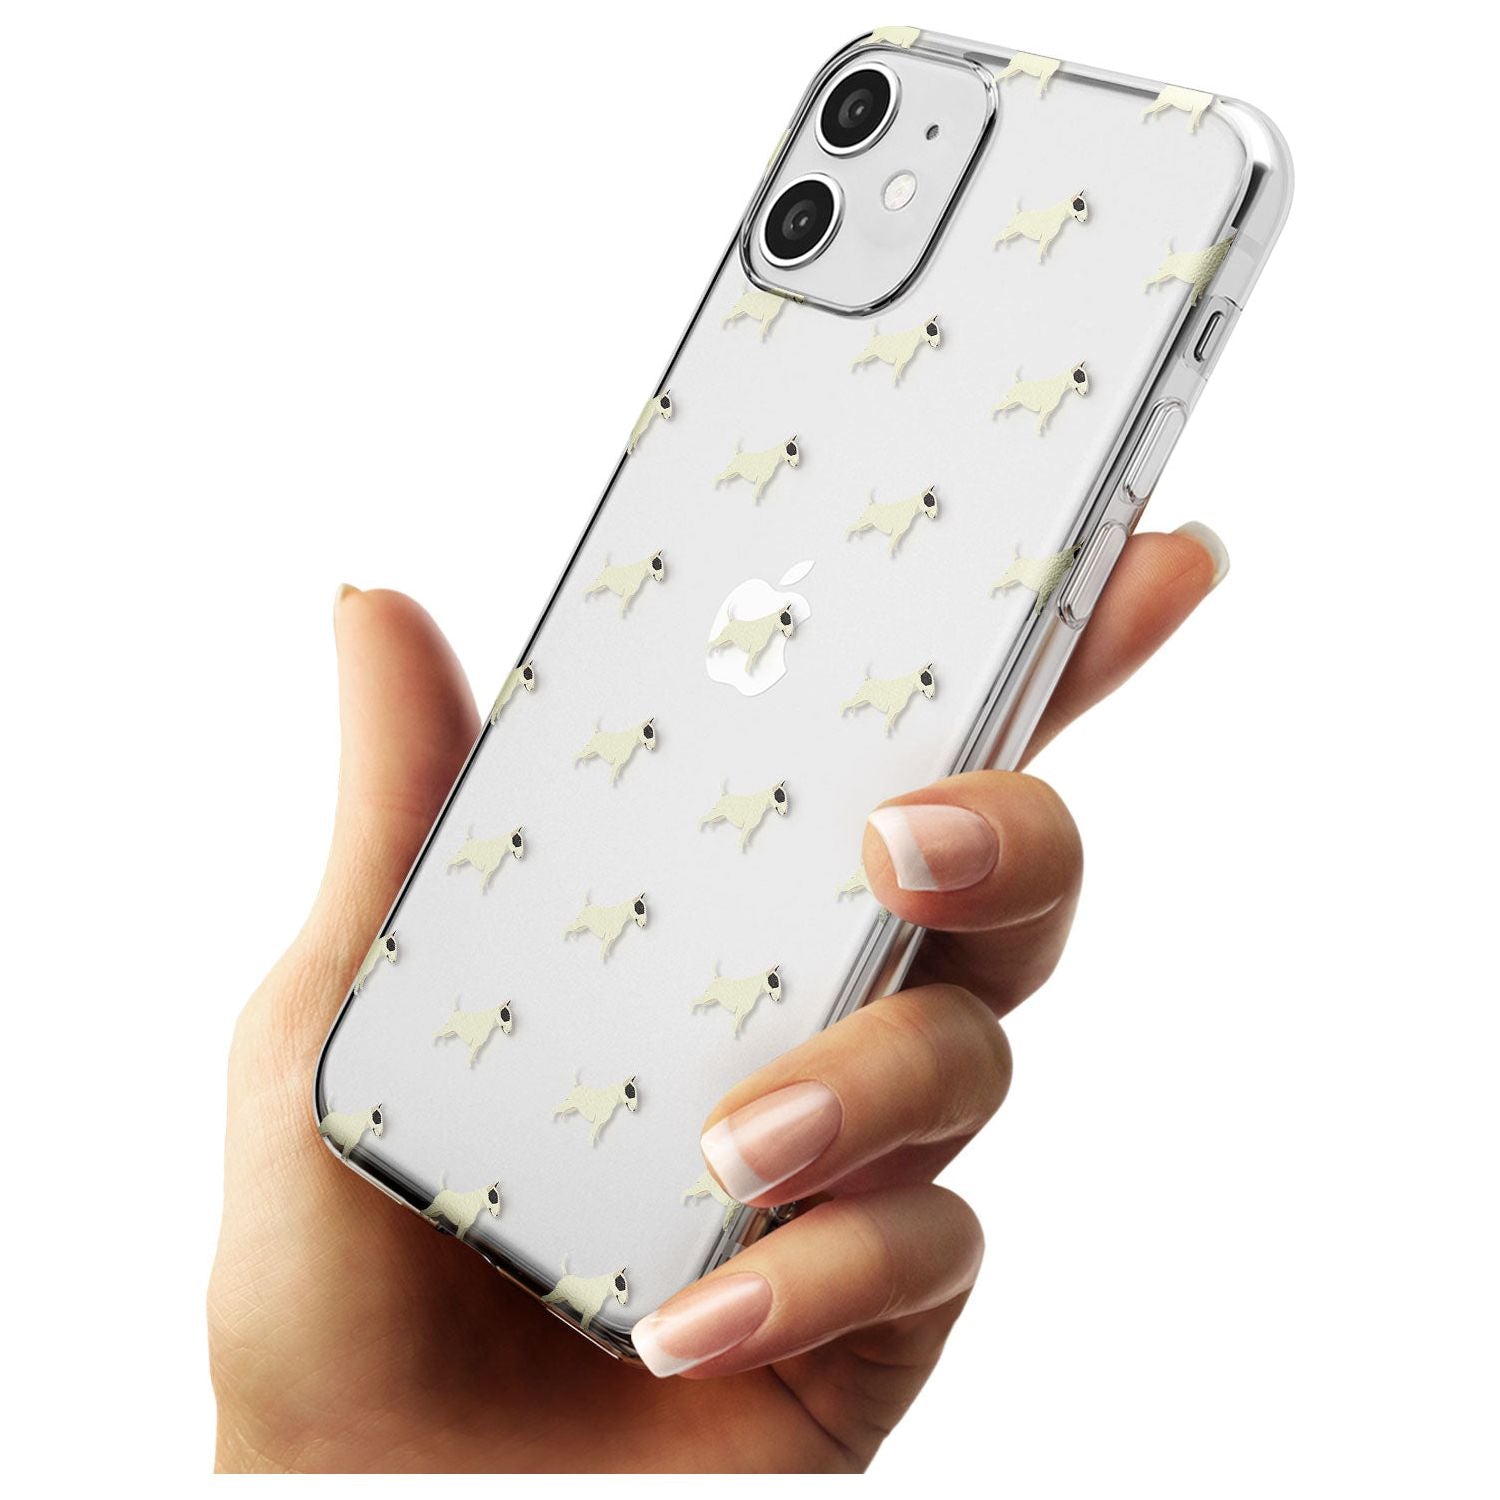 Bull Terrier Dog Pattern Clear Slim TPU Phone Case for iPhone 11